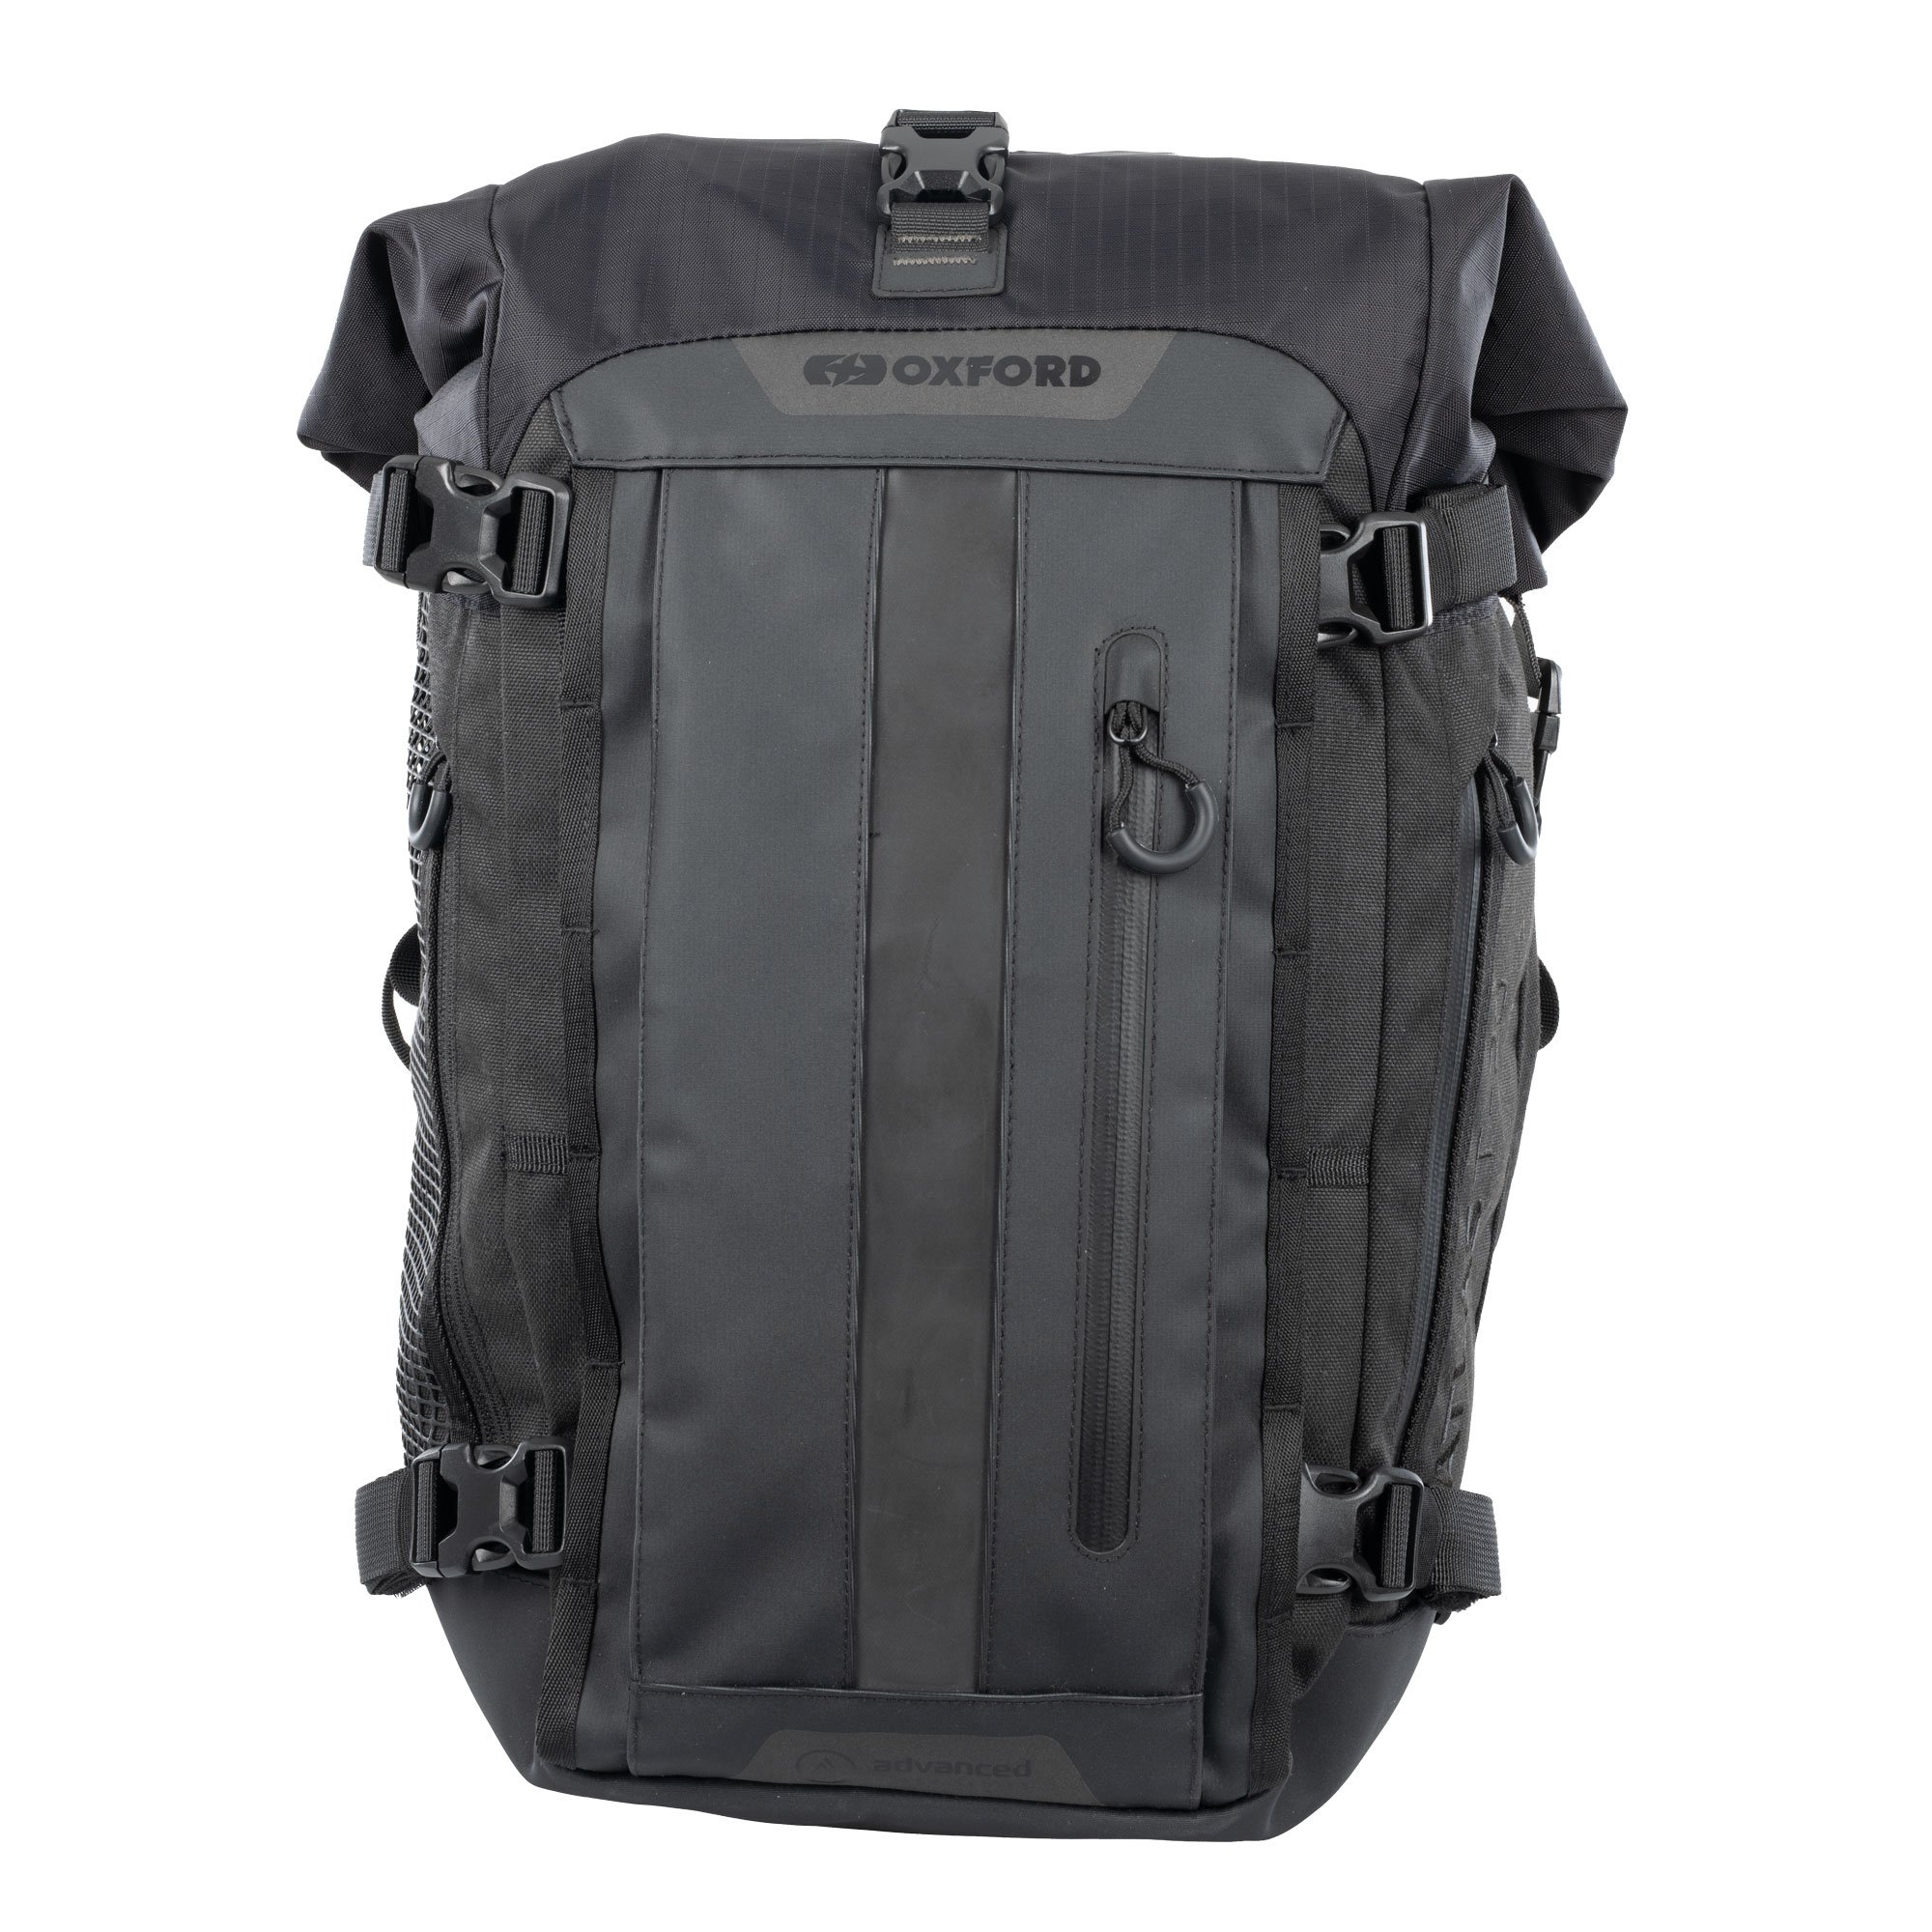 Oxford Atlas T-20 Advanced Tourpack Black : Oxford Products